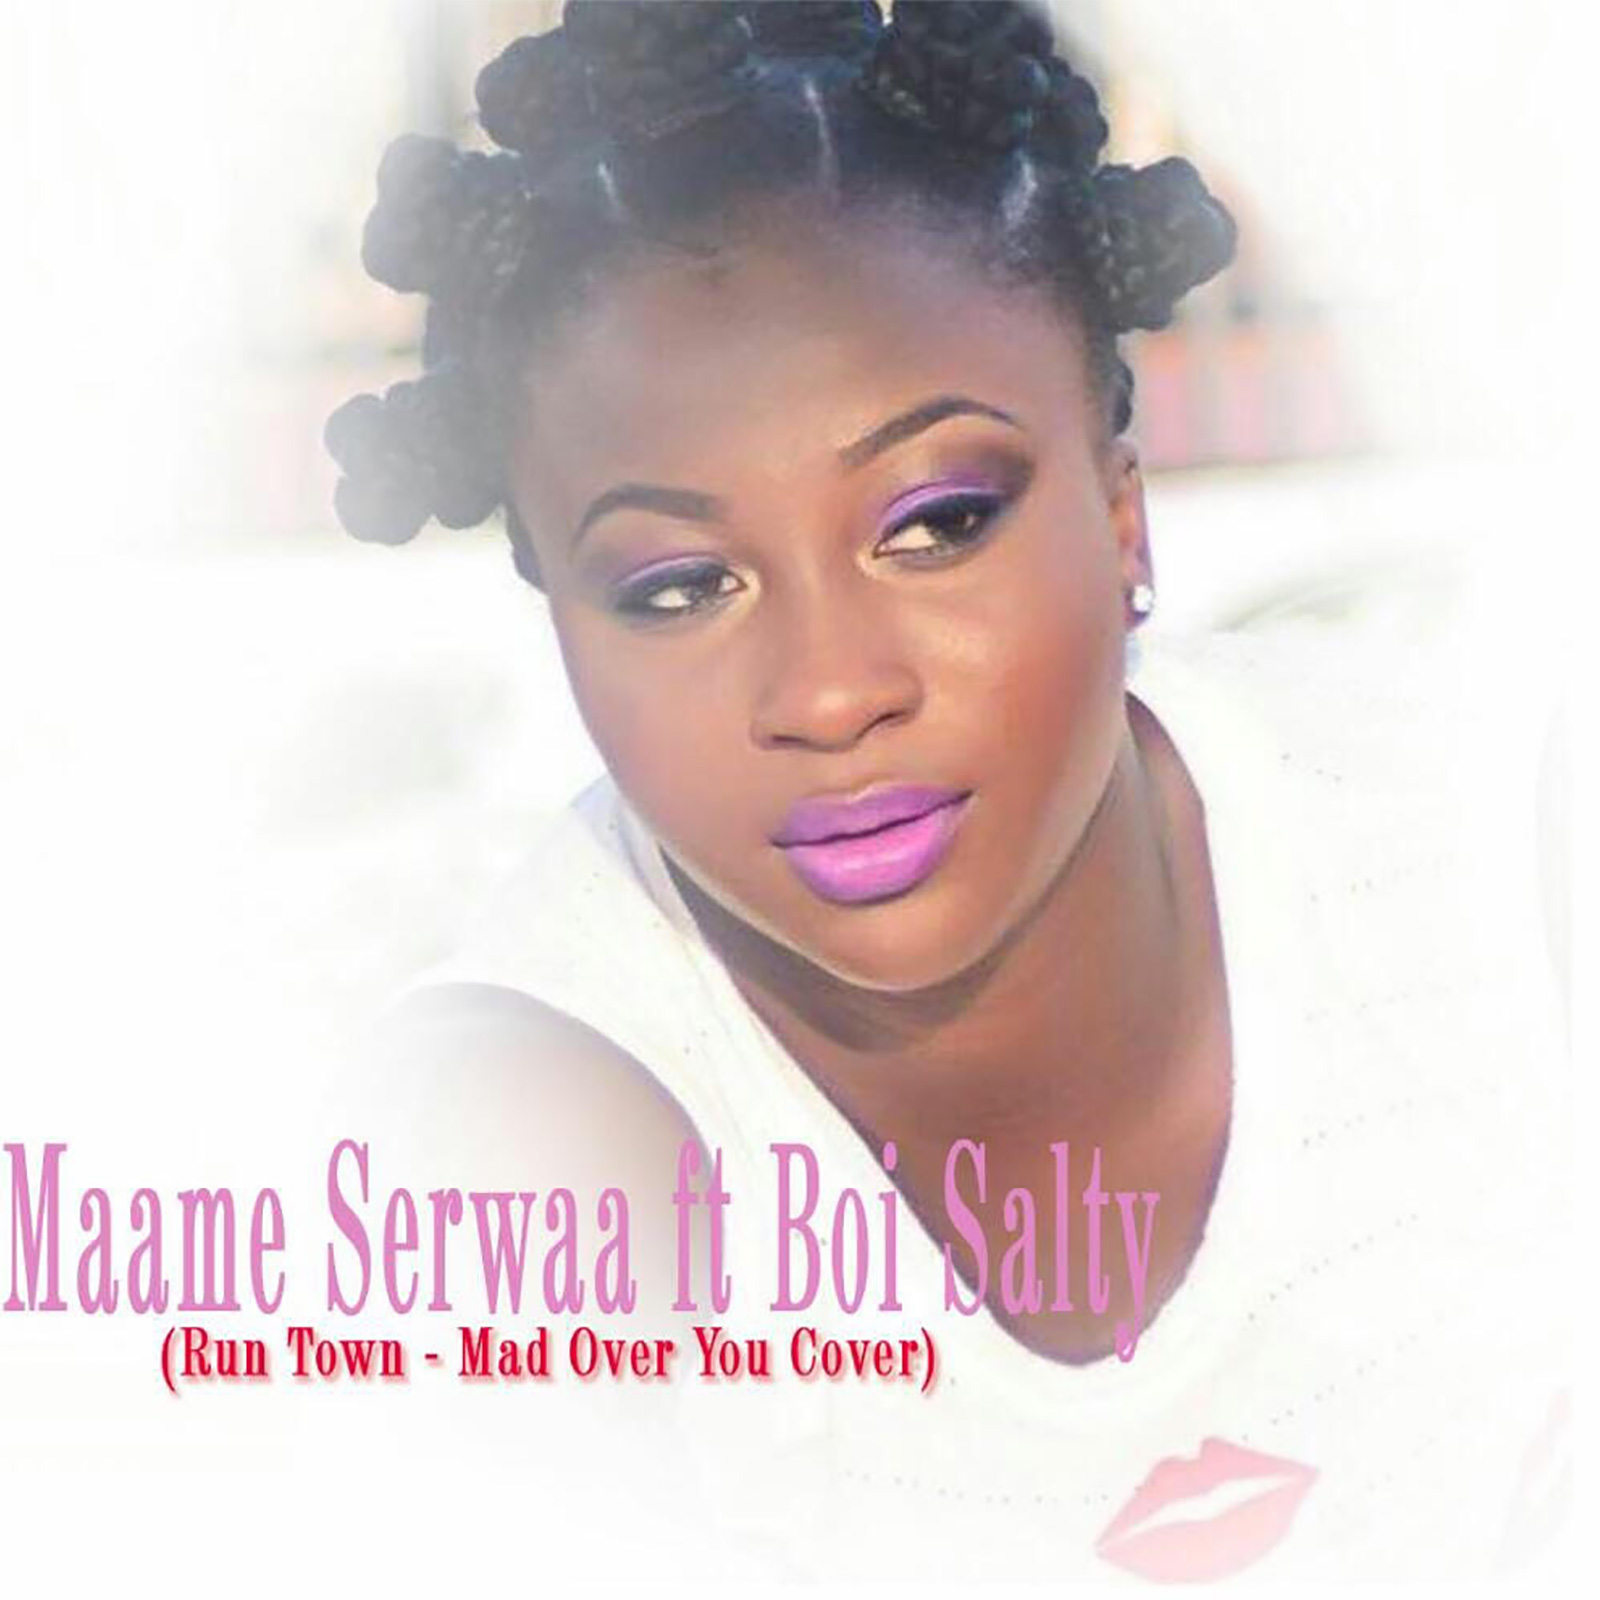 Mad Over You (Cover) by Maame Serwaa feat. Boi Salty